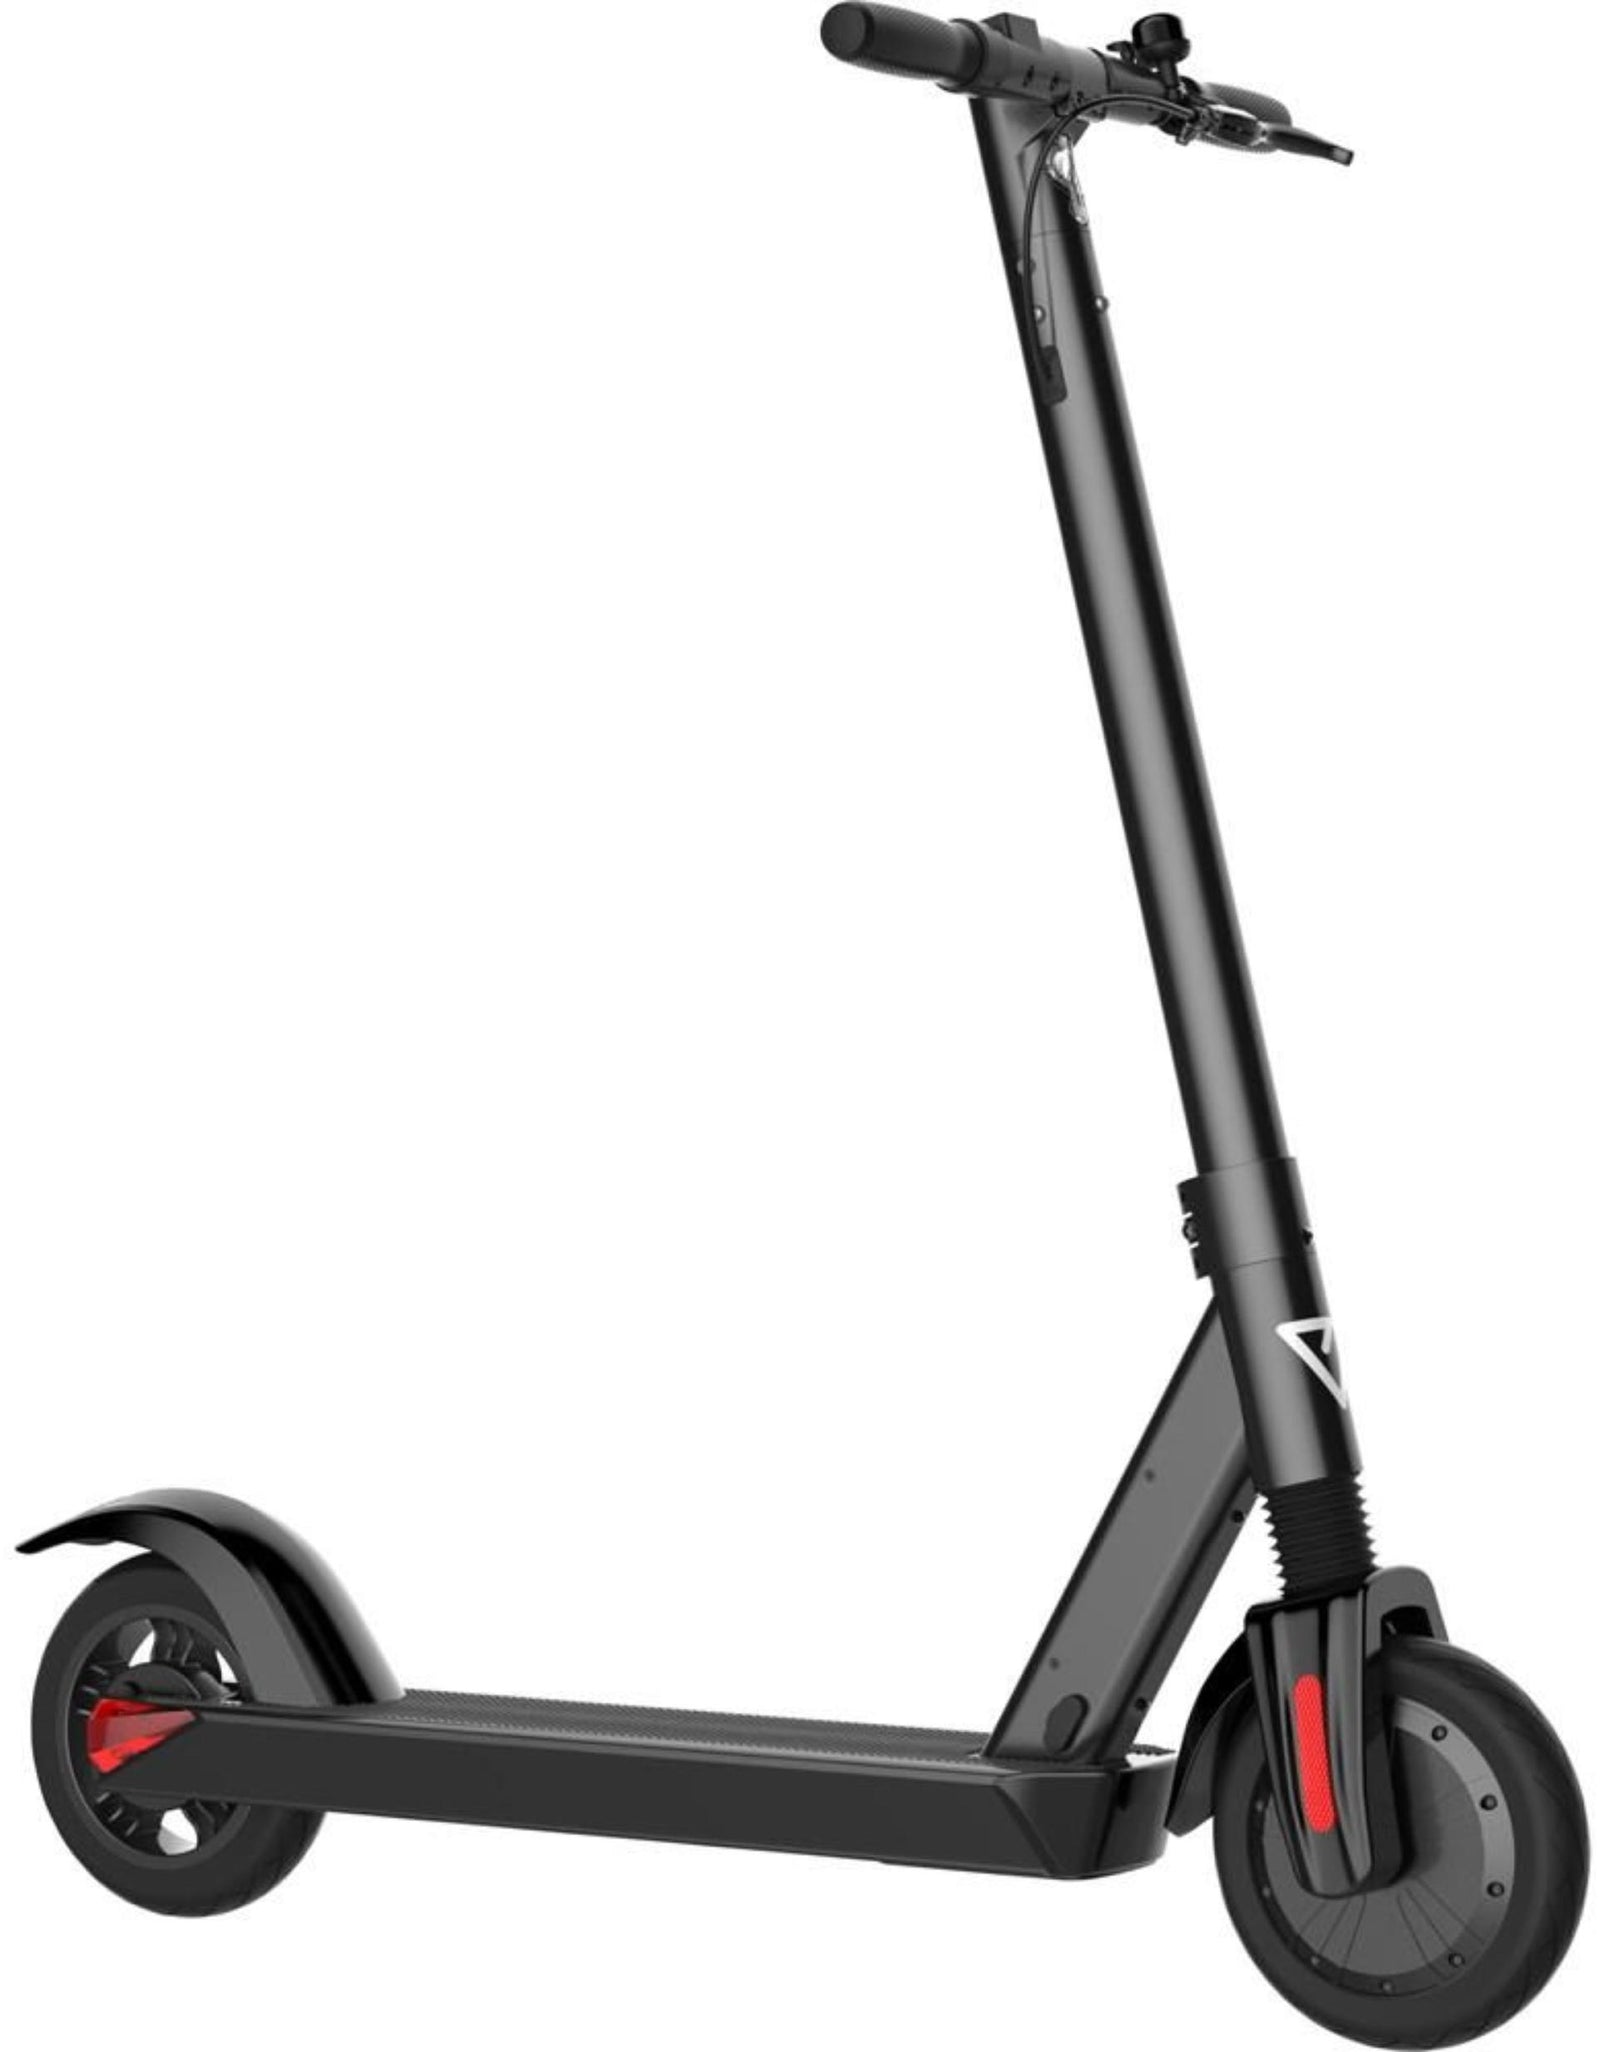 City Pro 36v 8ah 350w Lithium Electric Scooter Black